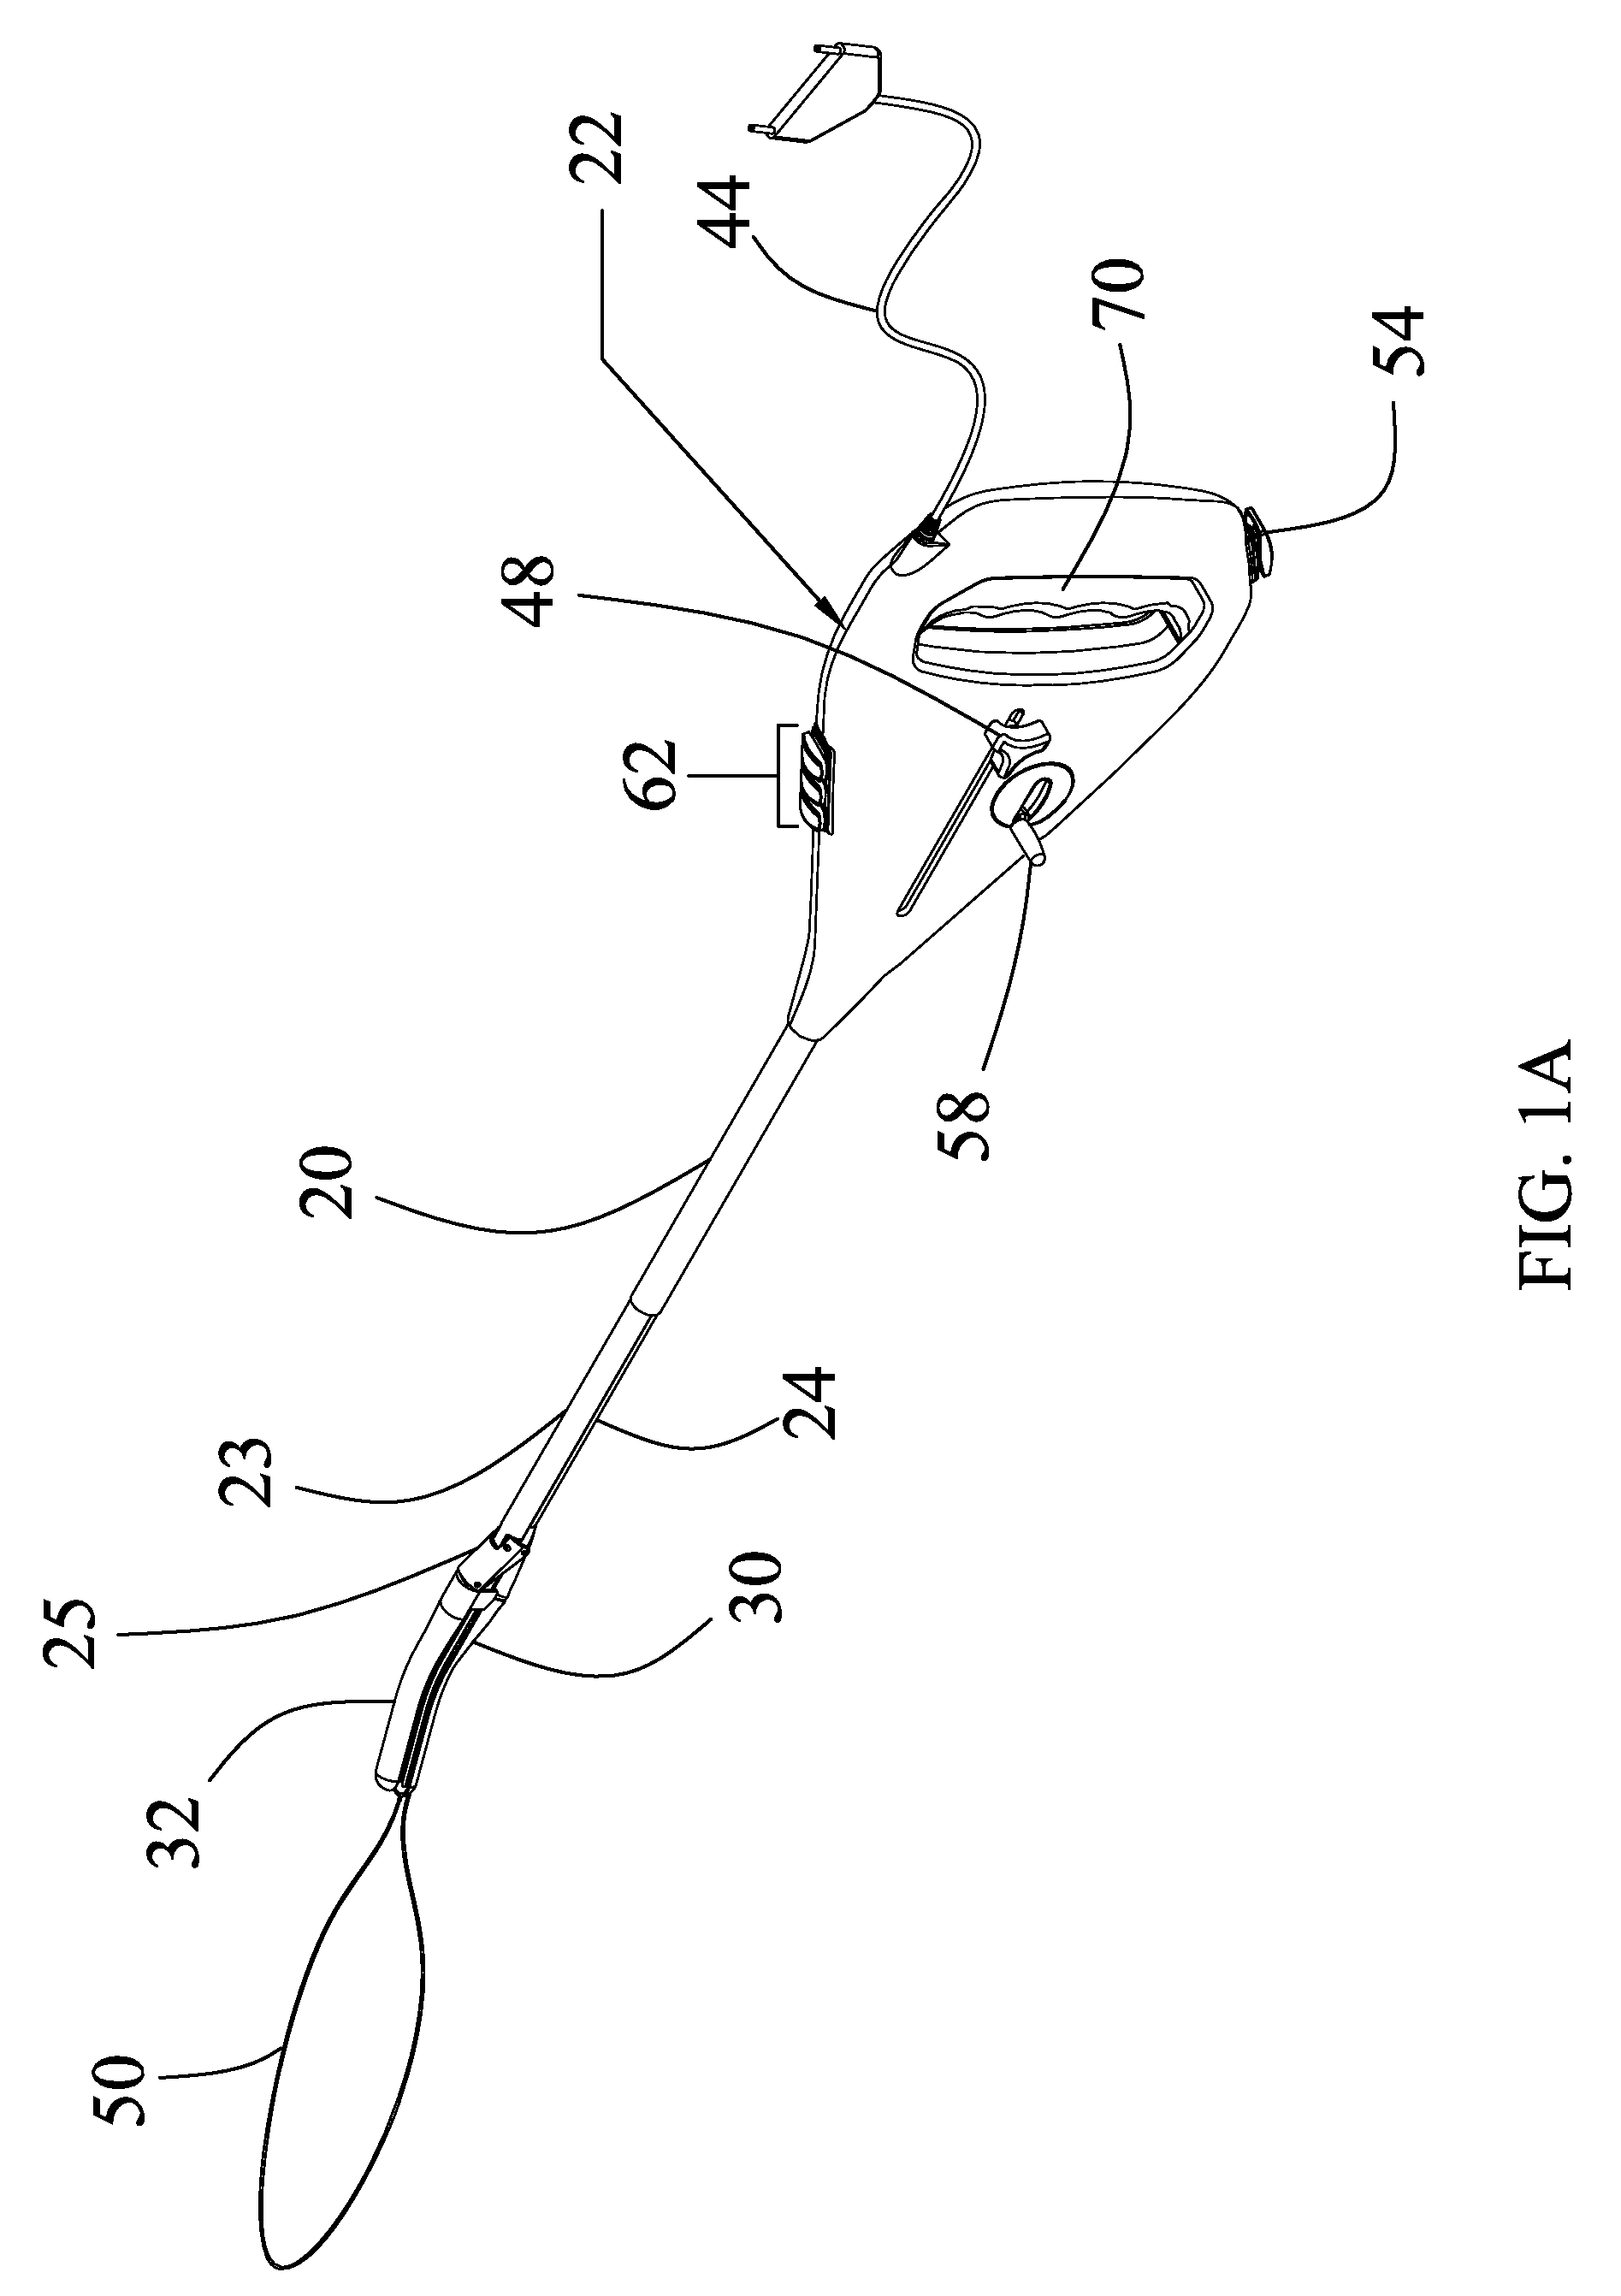 Resecting Device